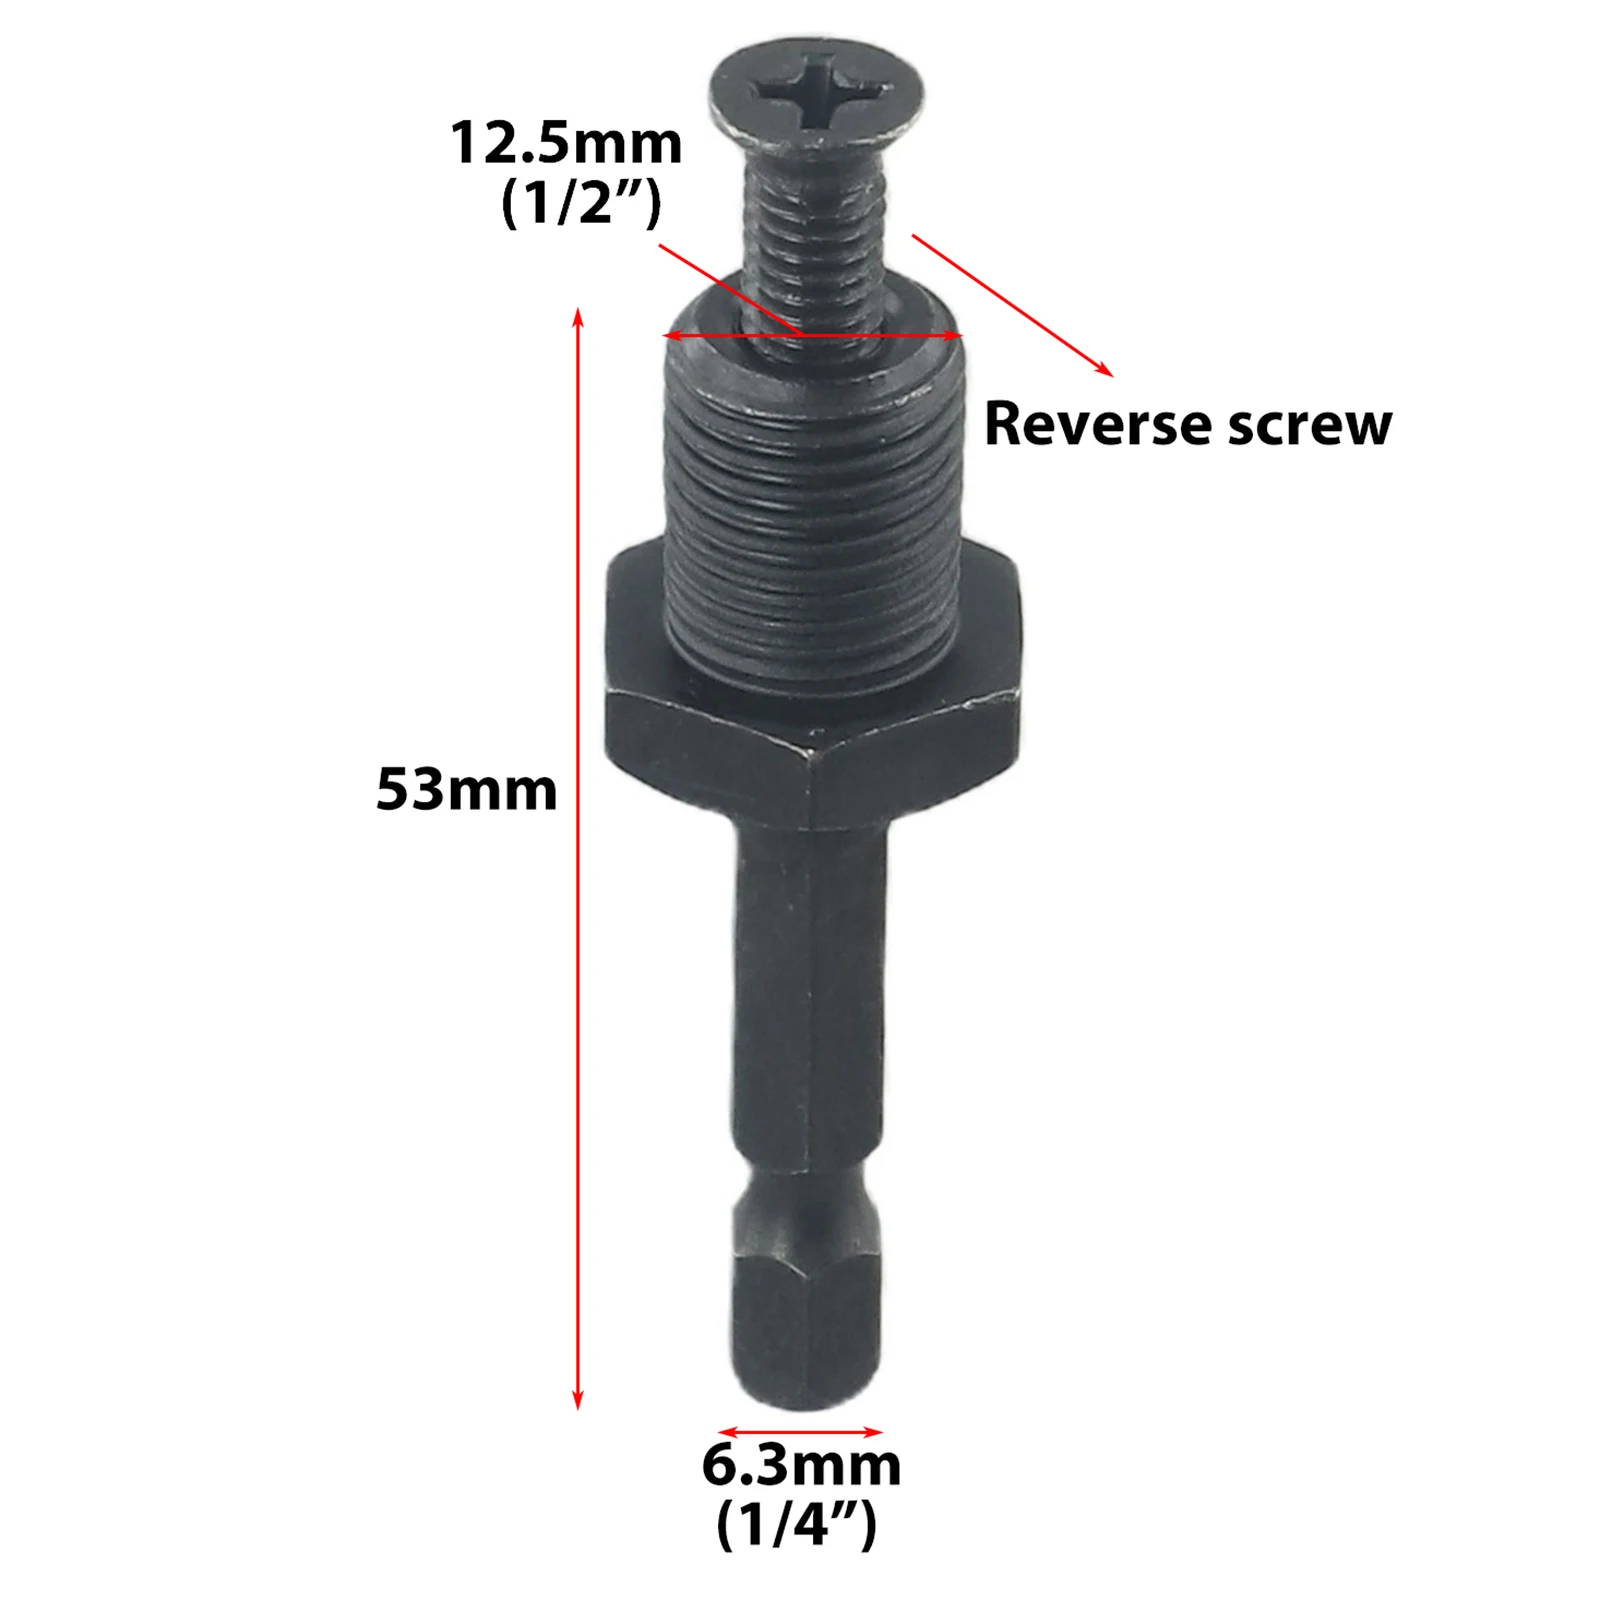 Drill Chuck Adapter 1/4 Hex Shank Adapter To 1/2 3/8 Male Thread W Reverse Screw For Drill Chuck Drilling Power Tool Accessories skw high end hifi ofc rca cable 2rca to 2rca male to male audio cable fit for car audio cd dvd player connect to power amplifier